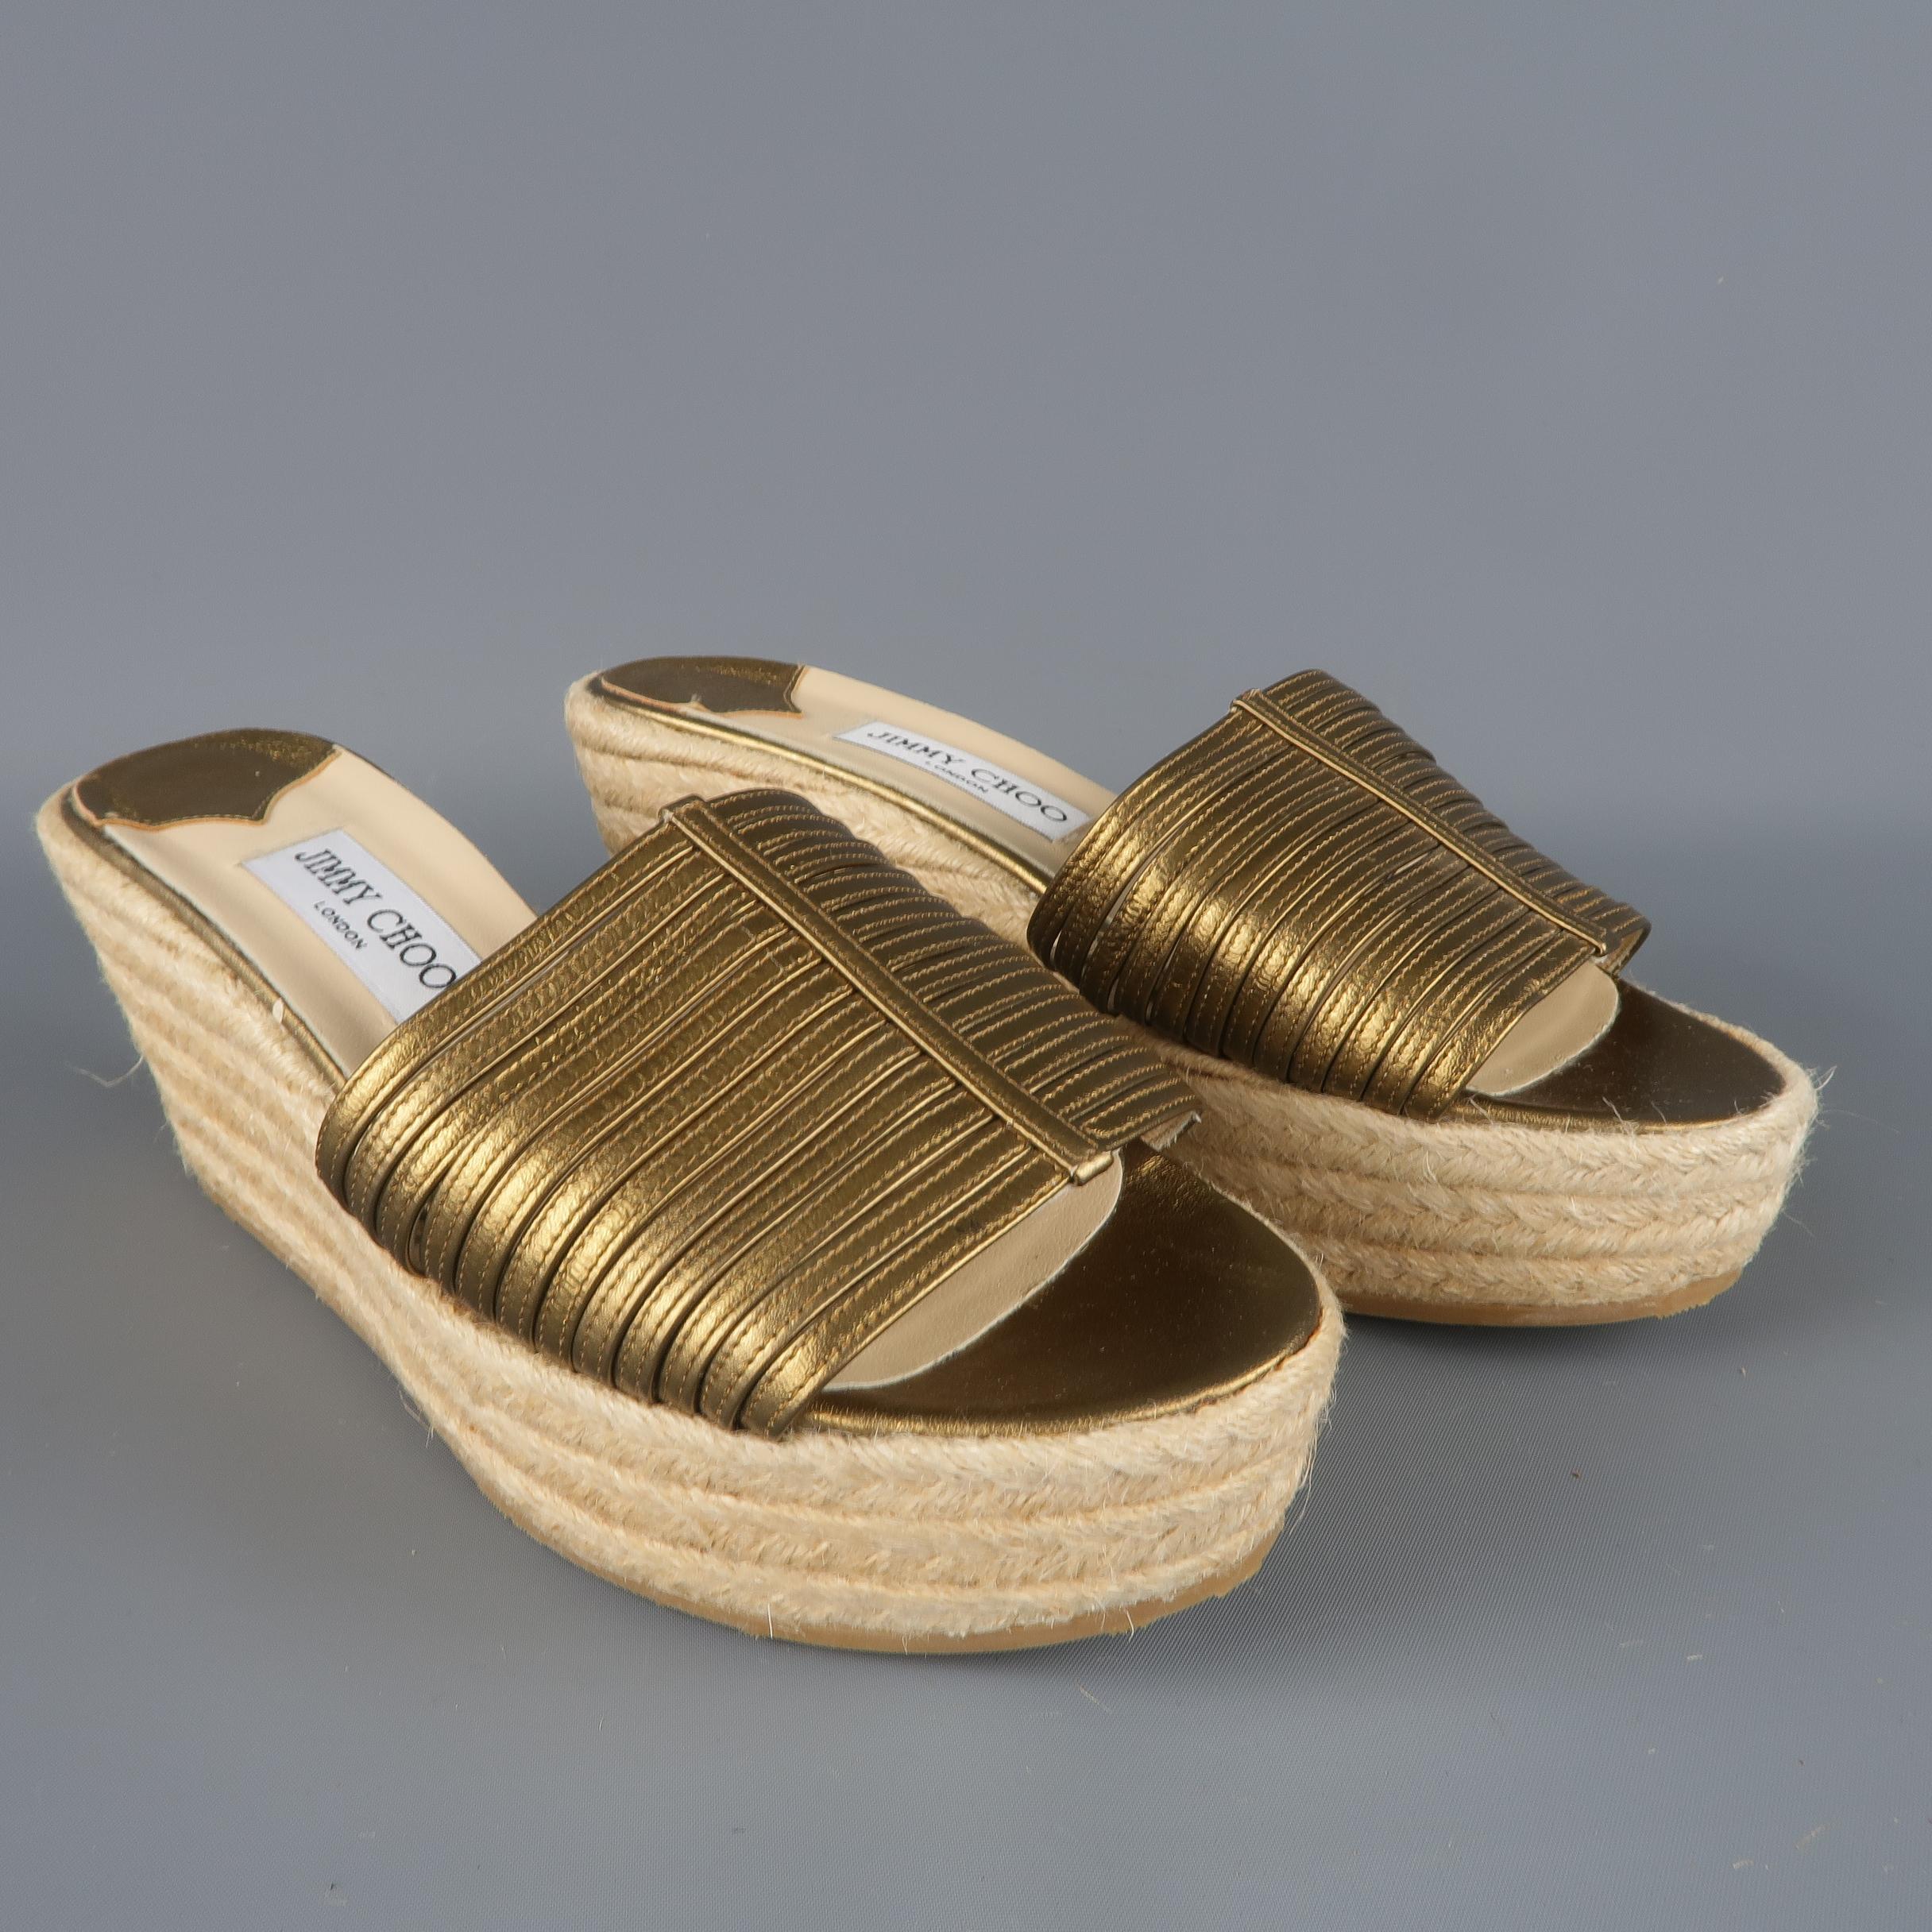 JIMMY CHOO sandals feature metallic gold leather strappy toe strap and braided espadrille platform wedge sole. New without Tags. Made in Italy.
 
Excellent Pre-Owned Condition.
Marked: IT 40
 
Measurements:
 
Heel: 2.75 in.
Platform: 1.5 in.